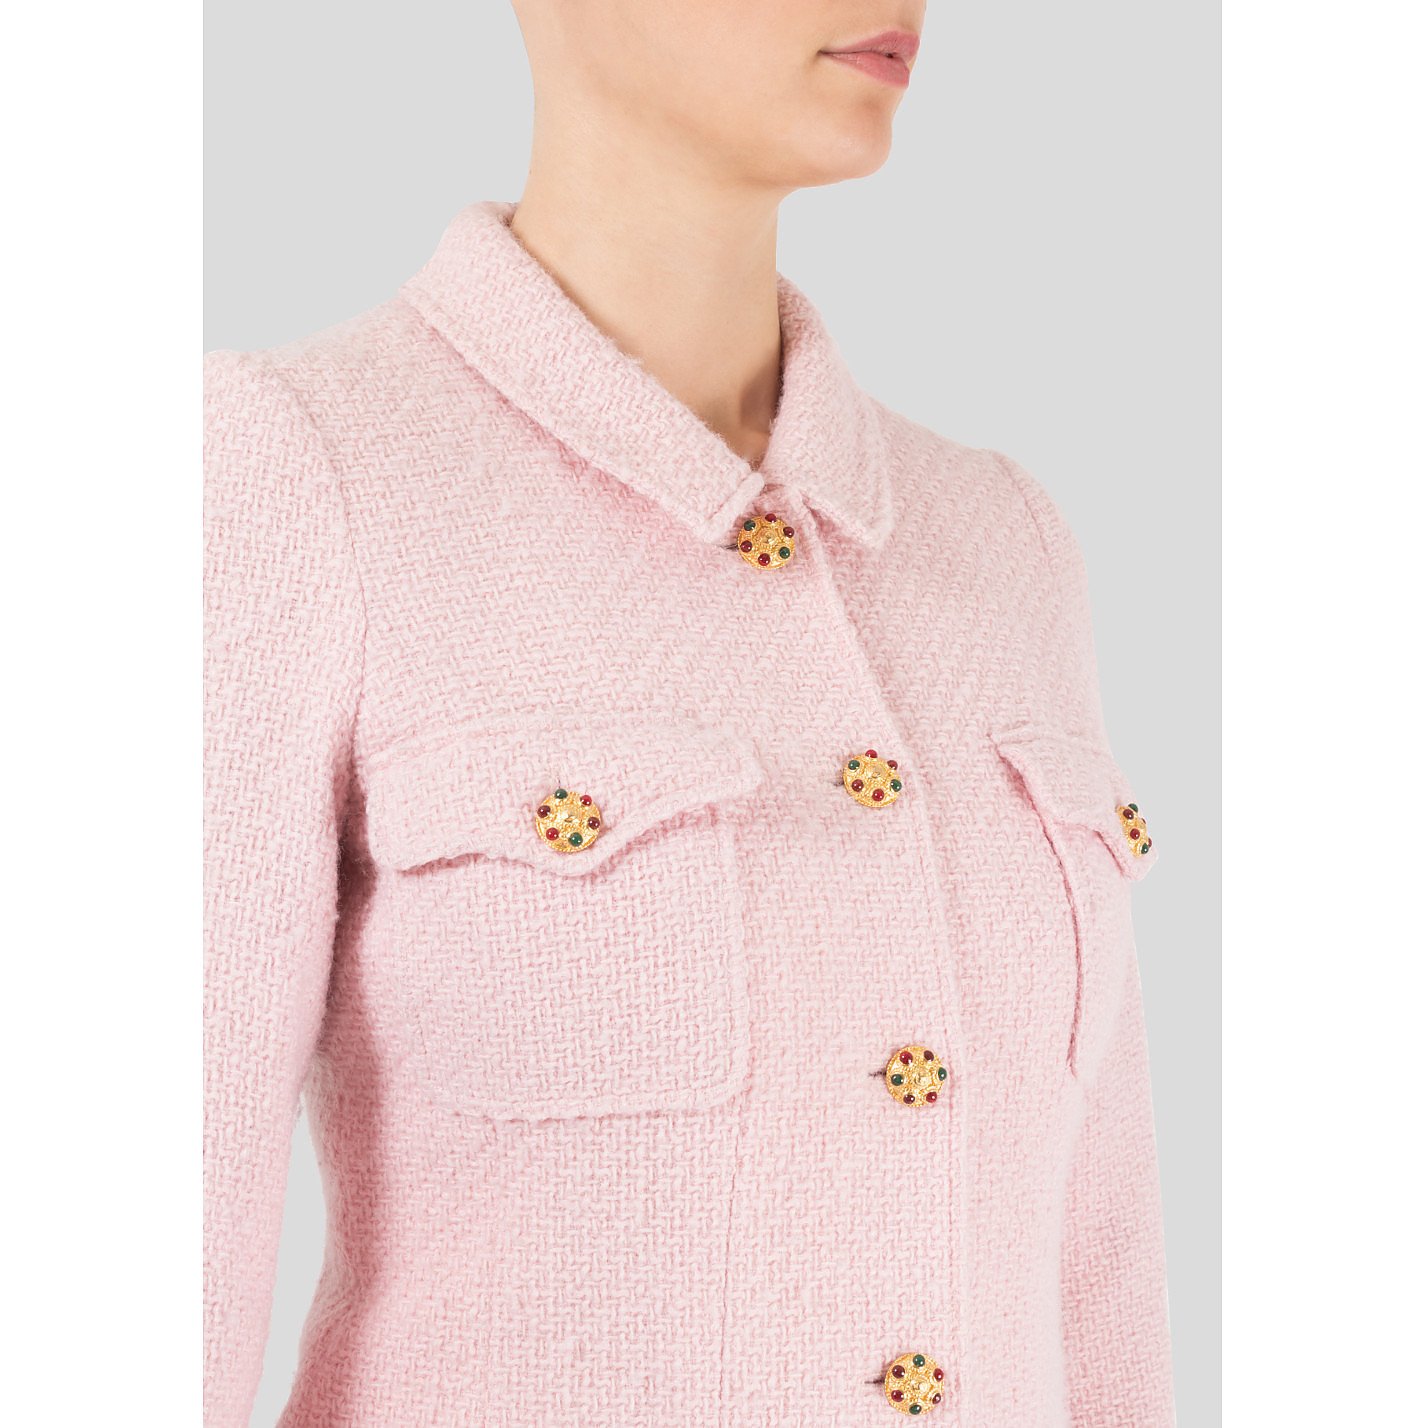 Vintage Chanel Pink Tweed Jacket from 1991 FR36 Same as Linda Evangelista   Mrs Vintage  Selling Vintage Wedding Lace Dress  Gowns  Accessories from  1920s  1990s And many One